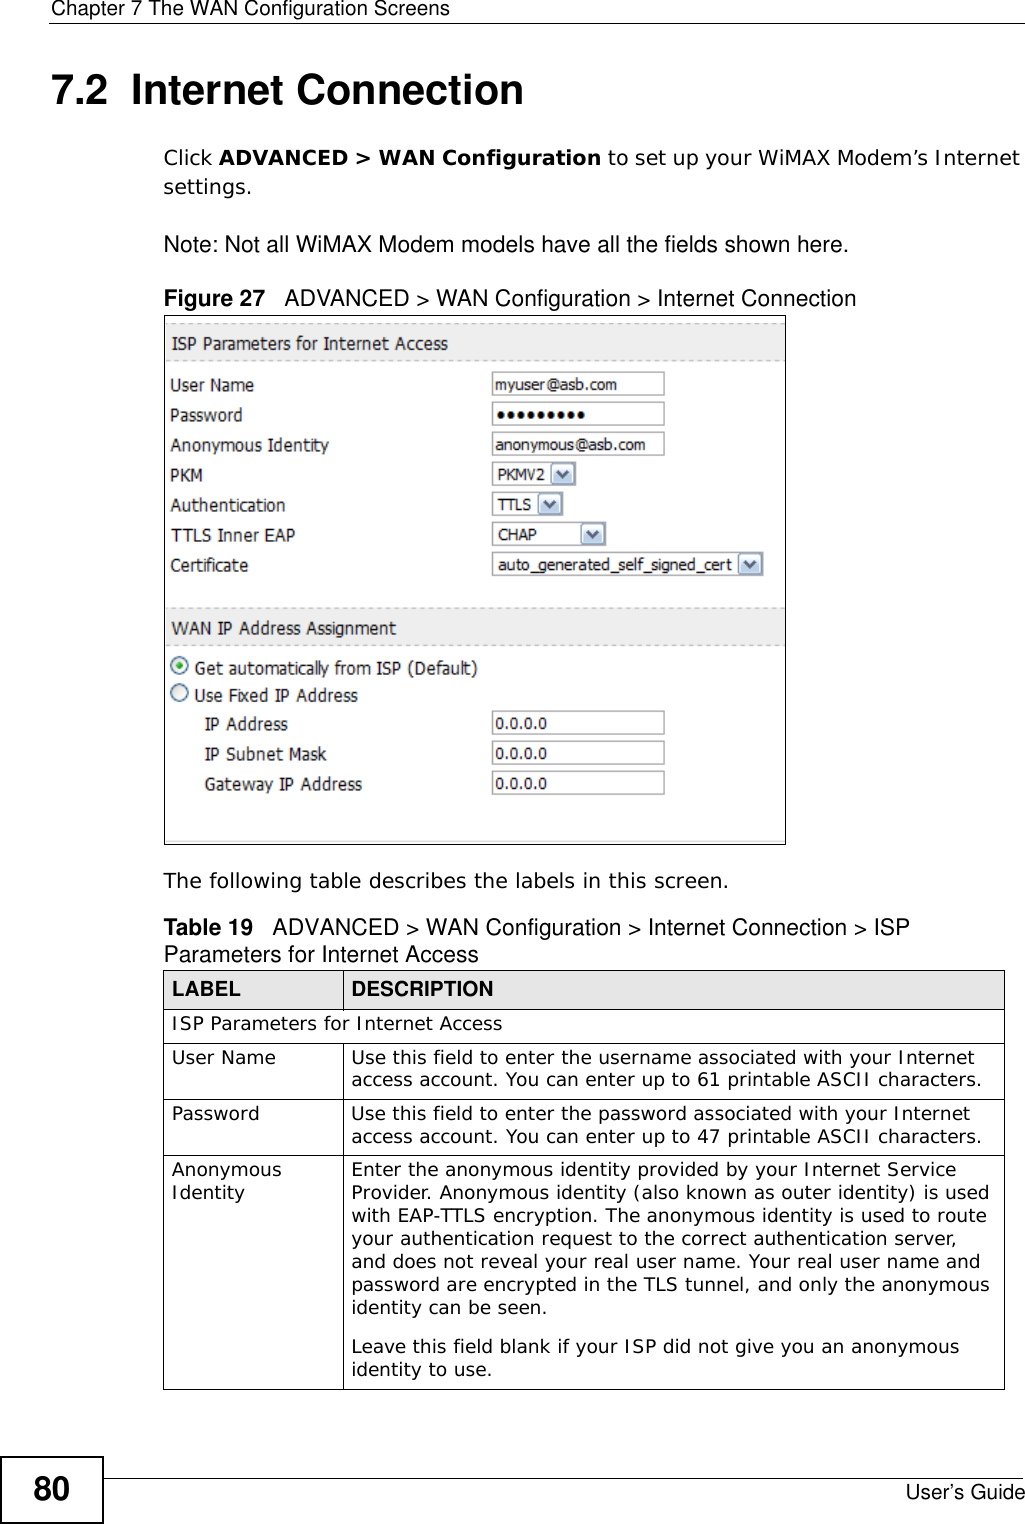 Chapter 7 The WAN Configuration ScreensUser’s Guide807.2  Internet ConnectionClick ADVANCED &gt; WAN Configuration to set up your WiMAX Modem’s Internet settings.Note: Not all WiMAX Modem models have all the fields shown here.Figure 27   ADVANCED &gt; WAN Configuration &gt; Internet ConnectionThe following table describes the labels in this screen.  Table 19   ADVANCED &gt; WAN Configuration &gt; Internet Connection &gt; ISP Parameters for Internet AccessLABEL DESCRIPTIONISP Parameters for Internet AccessUser Name Use this field to enter the username associated with your Internet access account. You can enter up to 61 printable ASCII characters.Password Use this field to enter the password associated with your Internet access account. You can enter up to 47 printable ASCII characters.Anonymous Identity Enter the anonymous identity provided by your Internet Service Provider. Anonymous identity (also known as outer identity) is used with EAP-TTLS encryption. The anonymous identity is used to route your authentication request to the correct authentication server, and does not reveal your real user name. Your real user name and password are encrypted in the TLS tunnel, and only the anonymous identity can be seen.Leave this field blank if your ISP did not give you an anonymous identity to use.